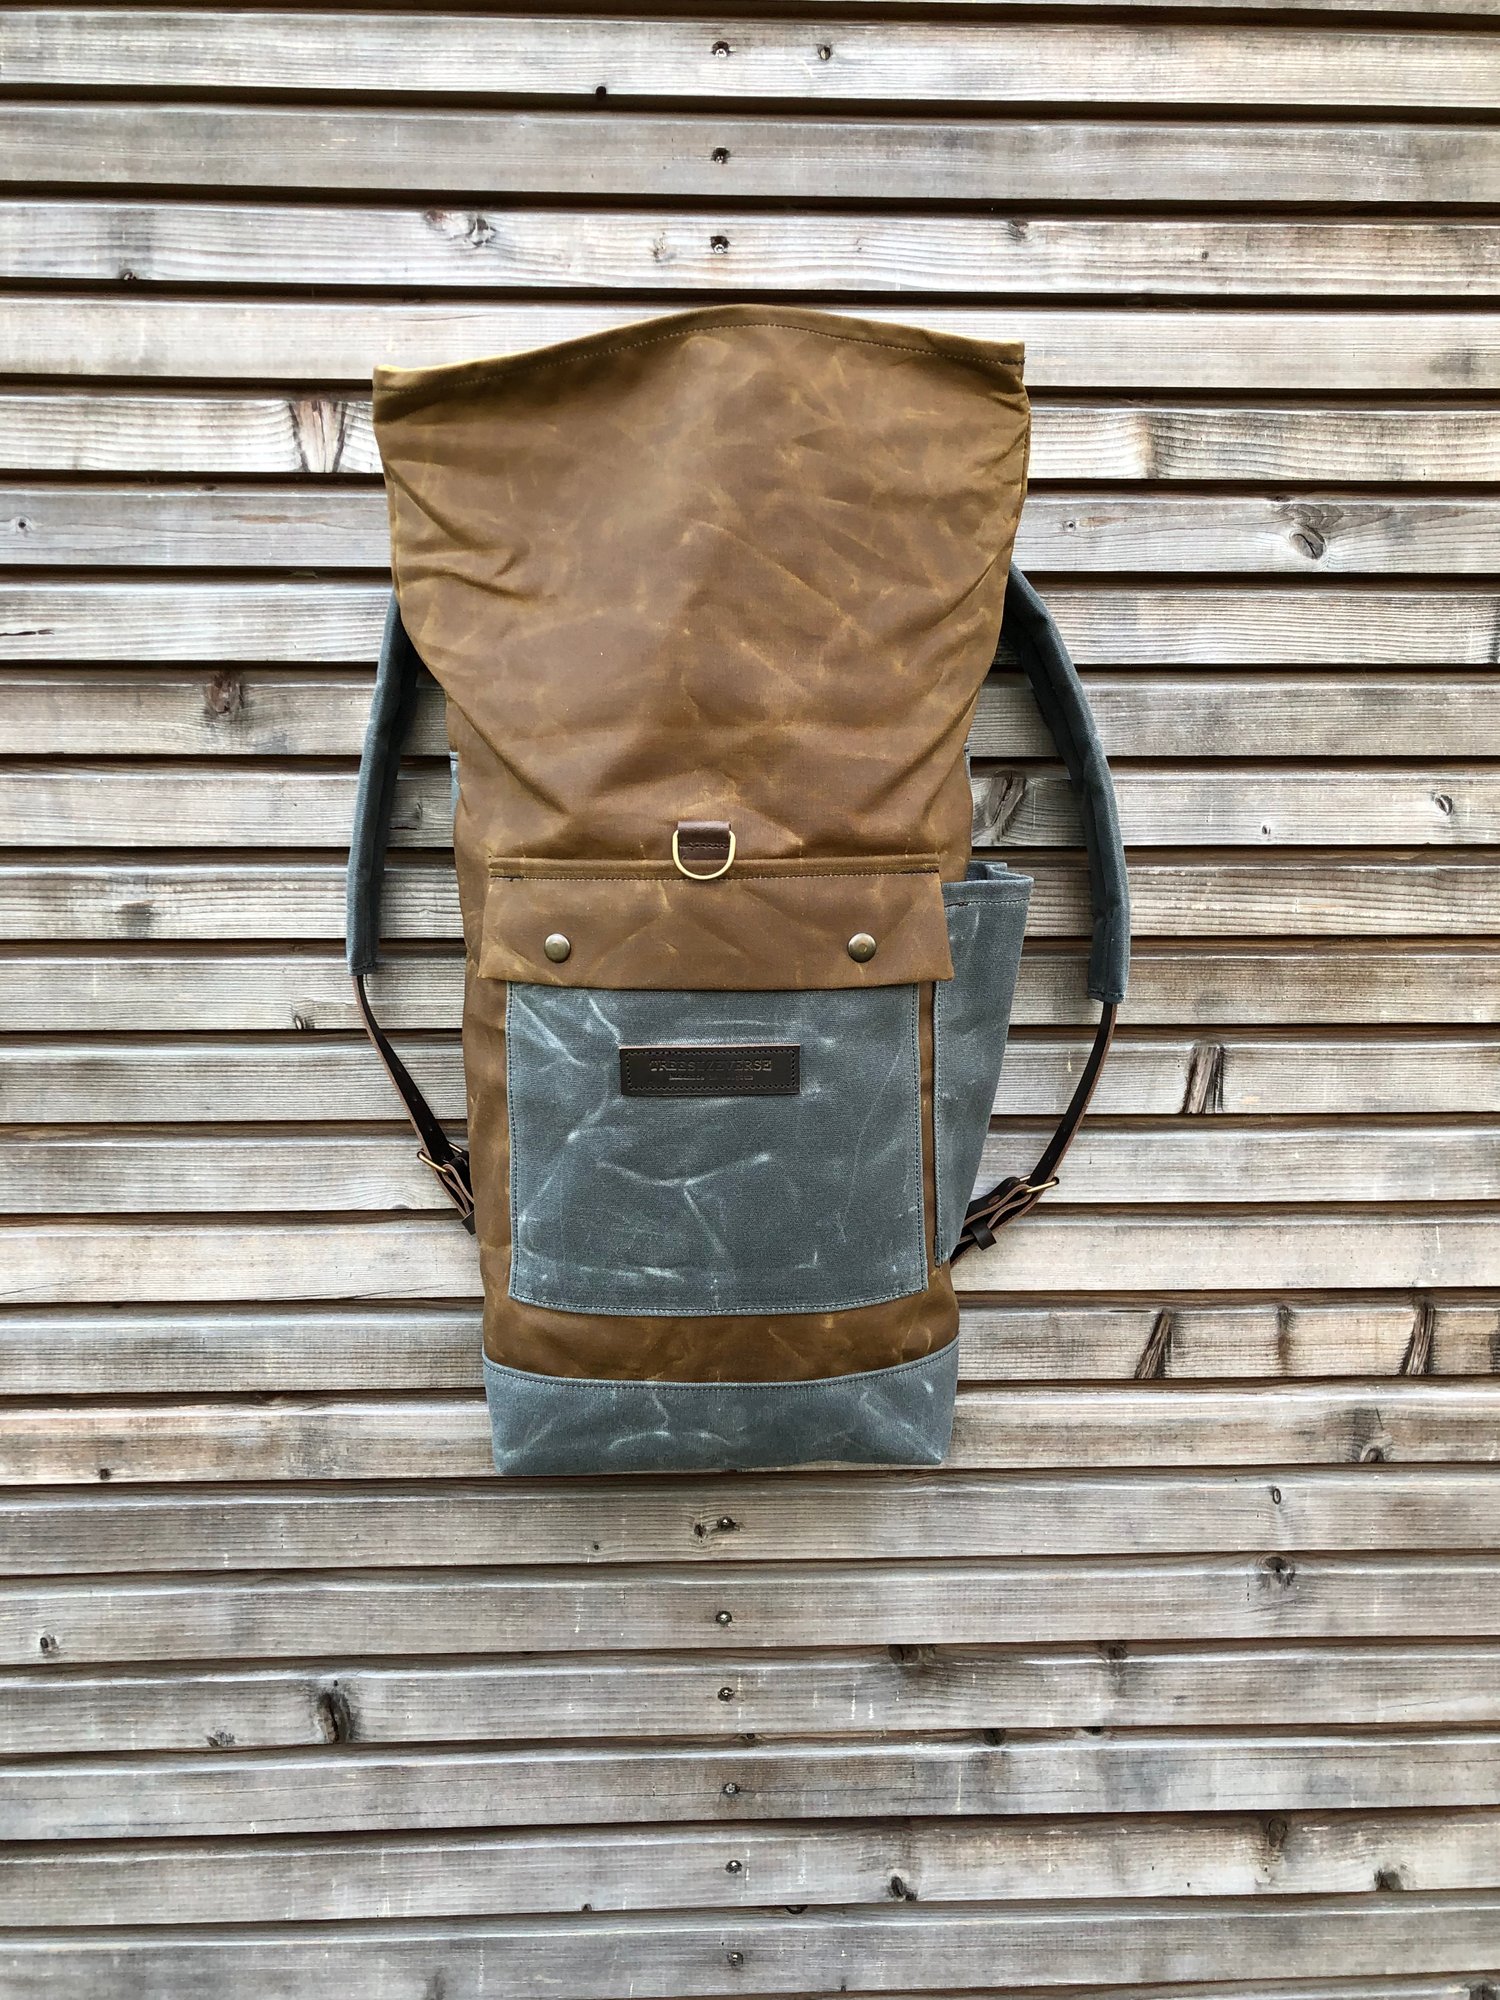 Image of waxed canvas backpack / medium size backpack / waterproof backpack with padded shoulder straps and w